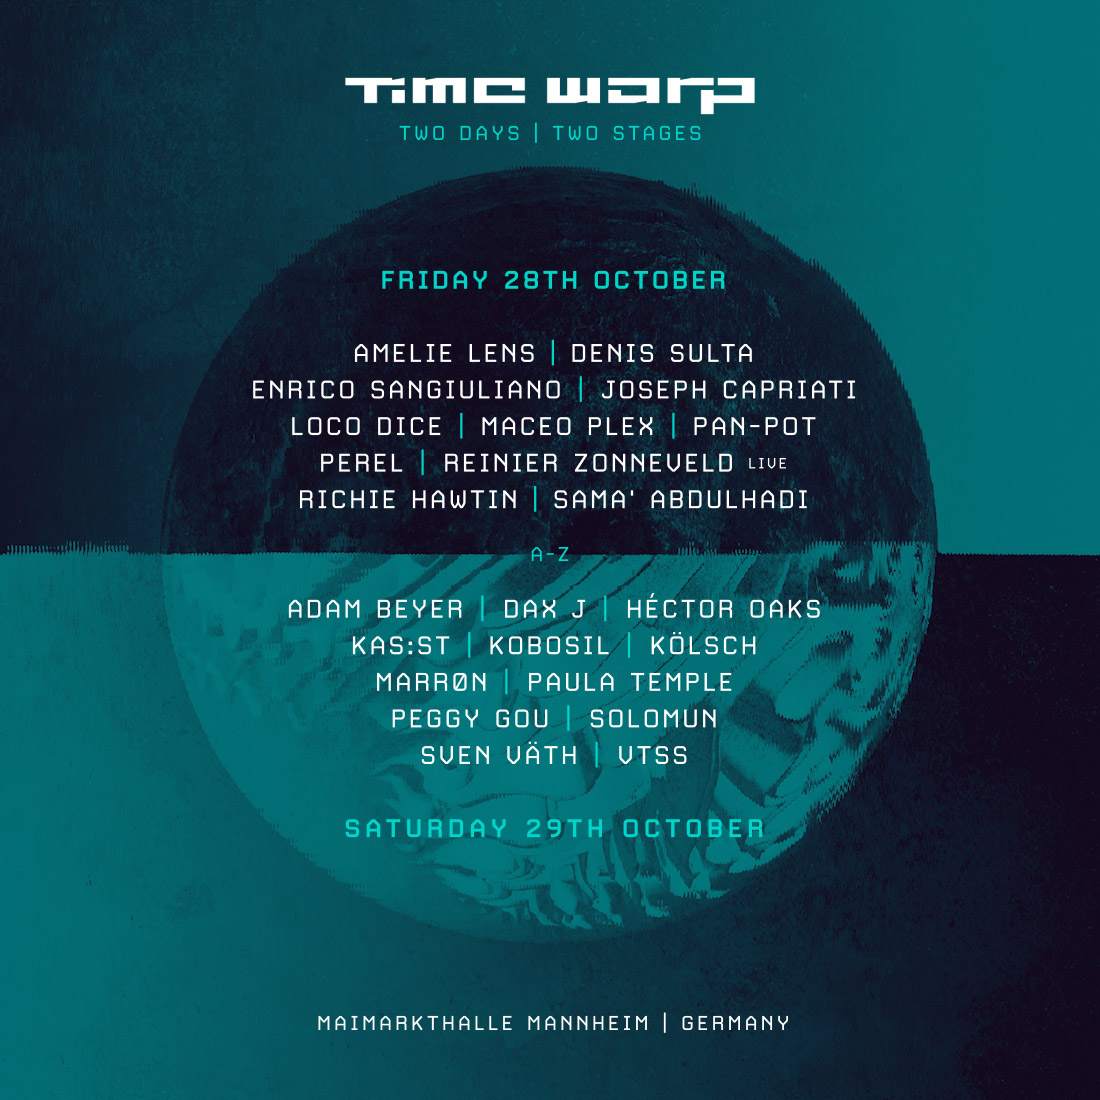 Time Warp Two Days - Two Stages - Página frontal